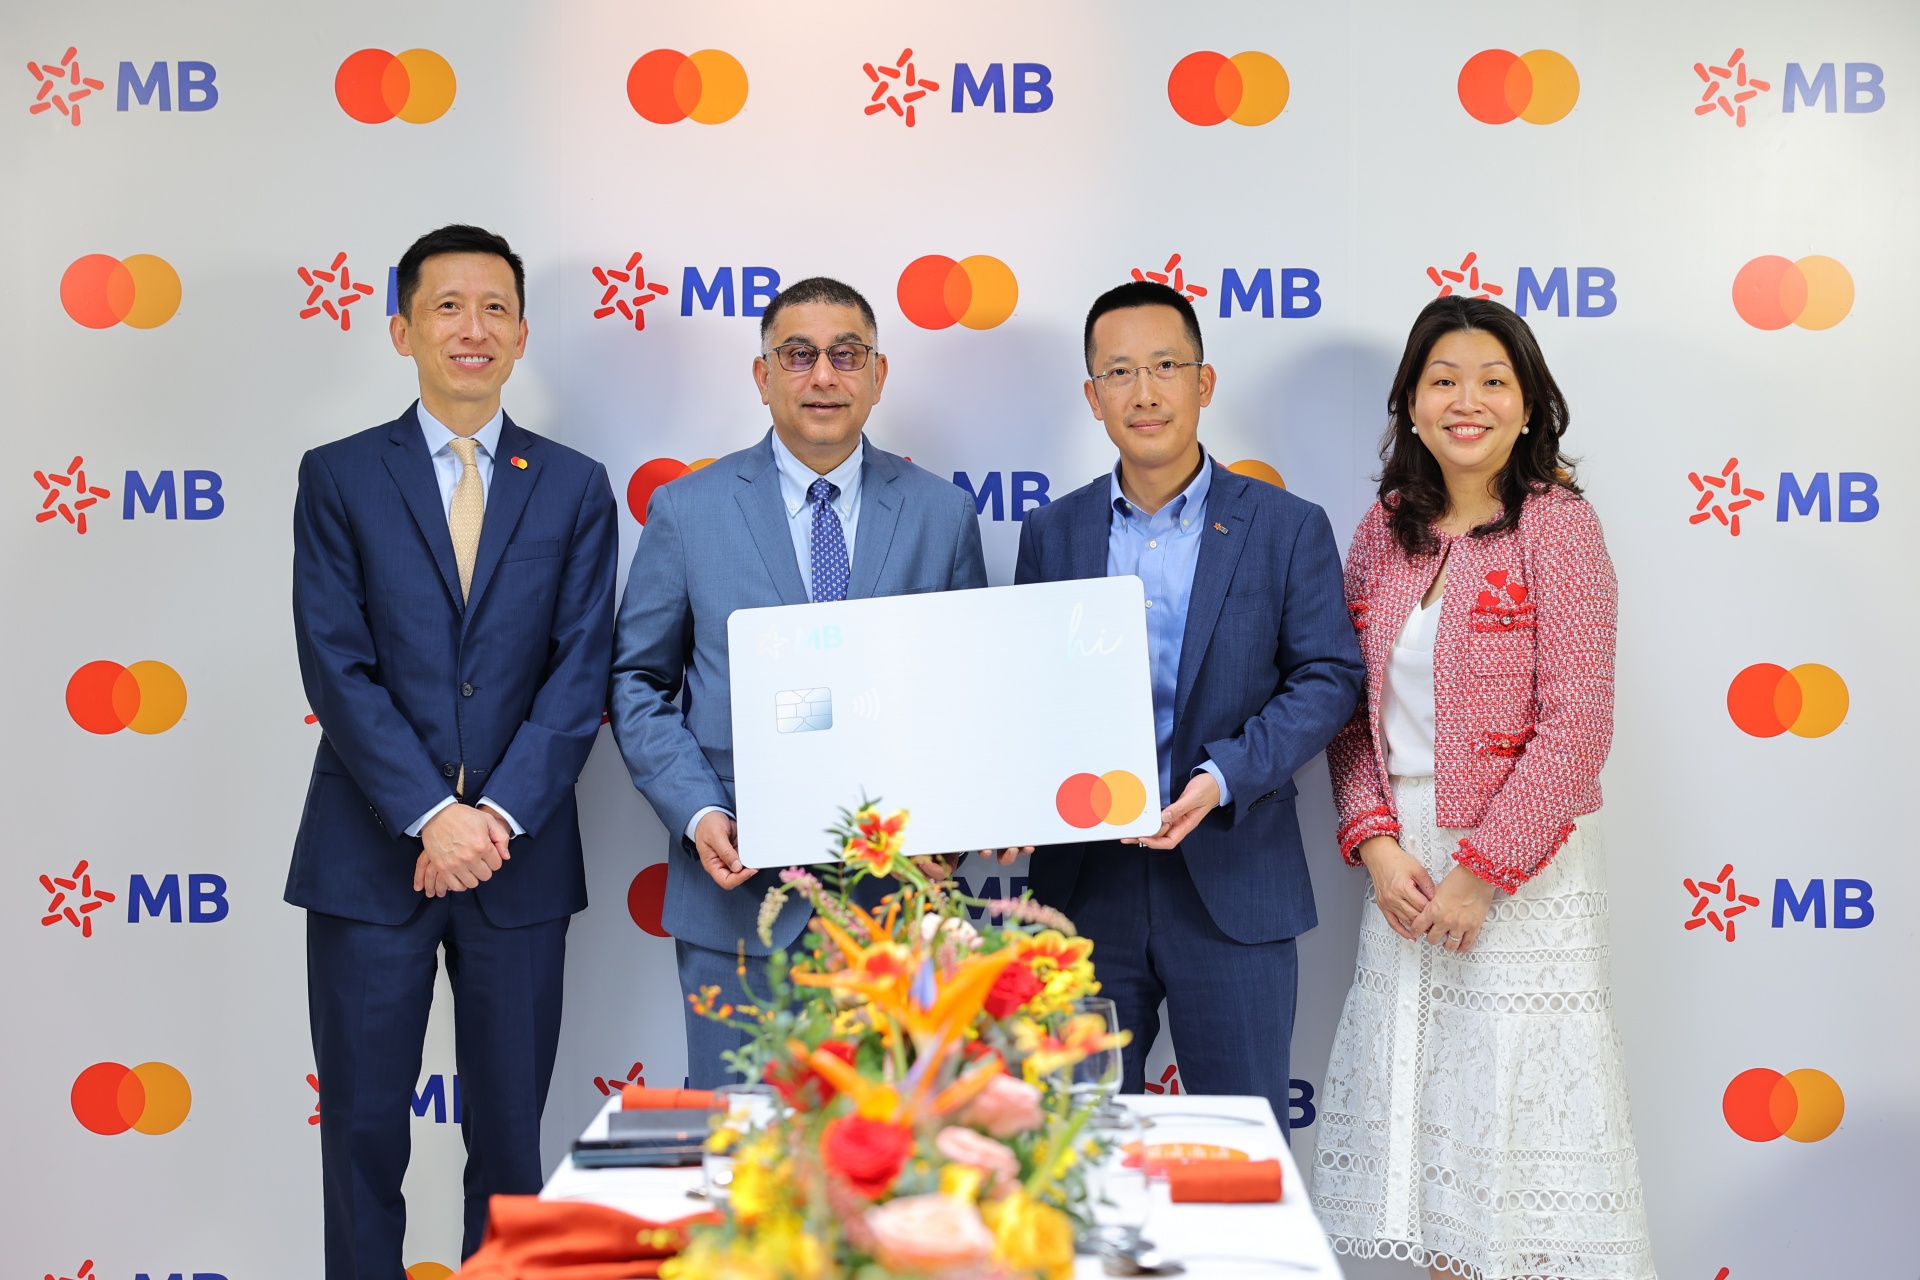 MB and Mastercard forge partnership in payment innovation